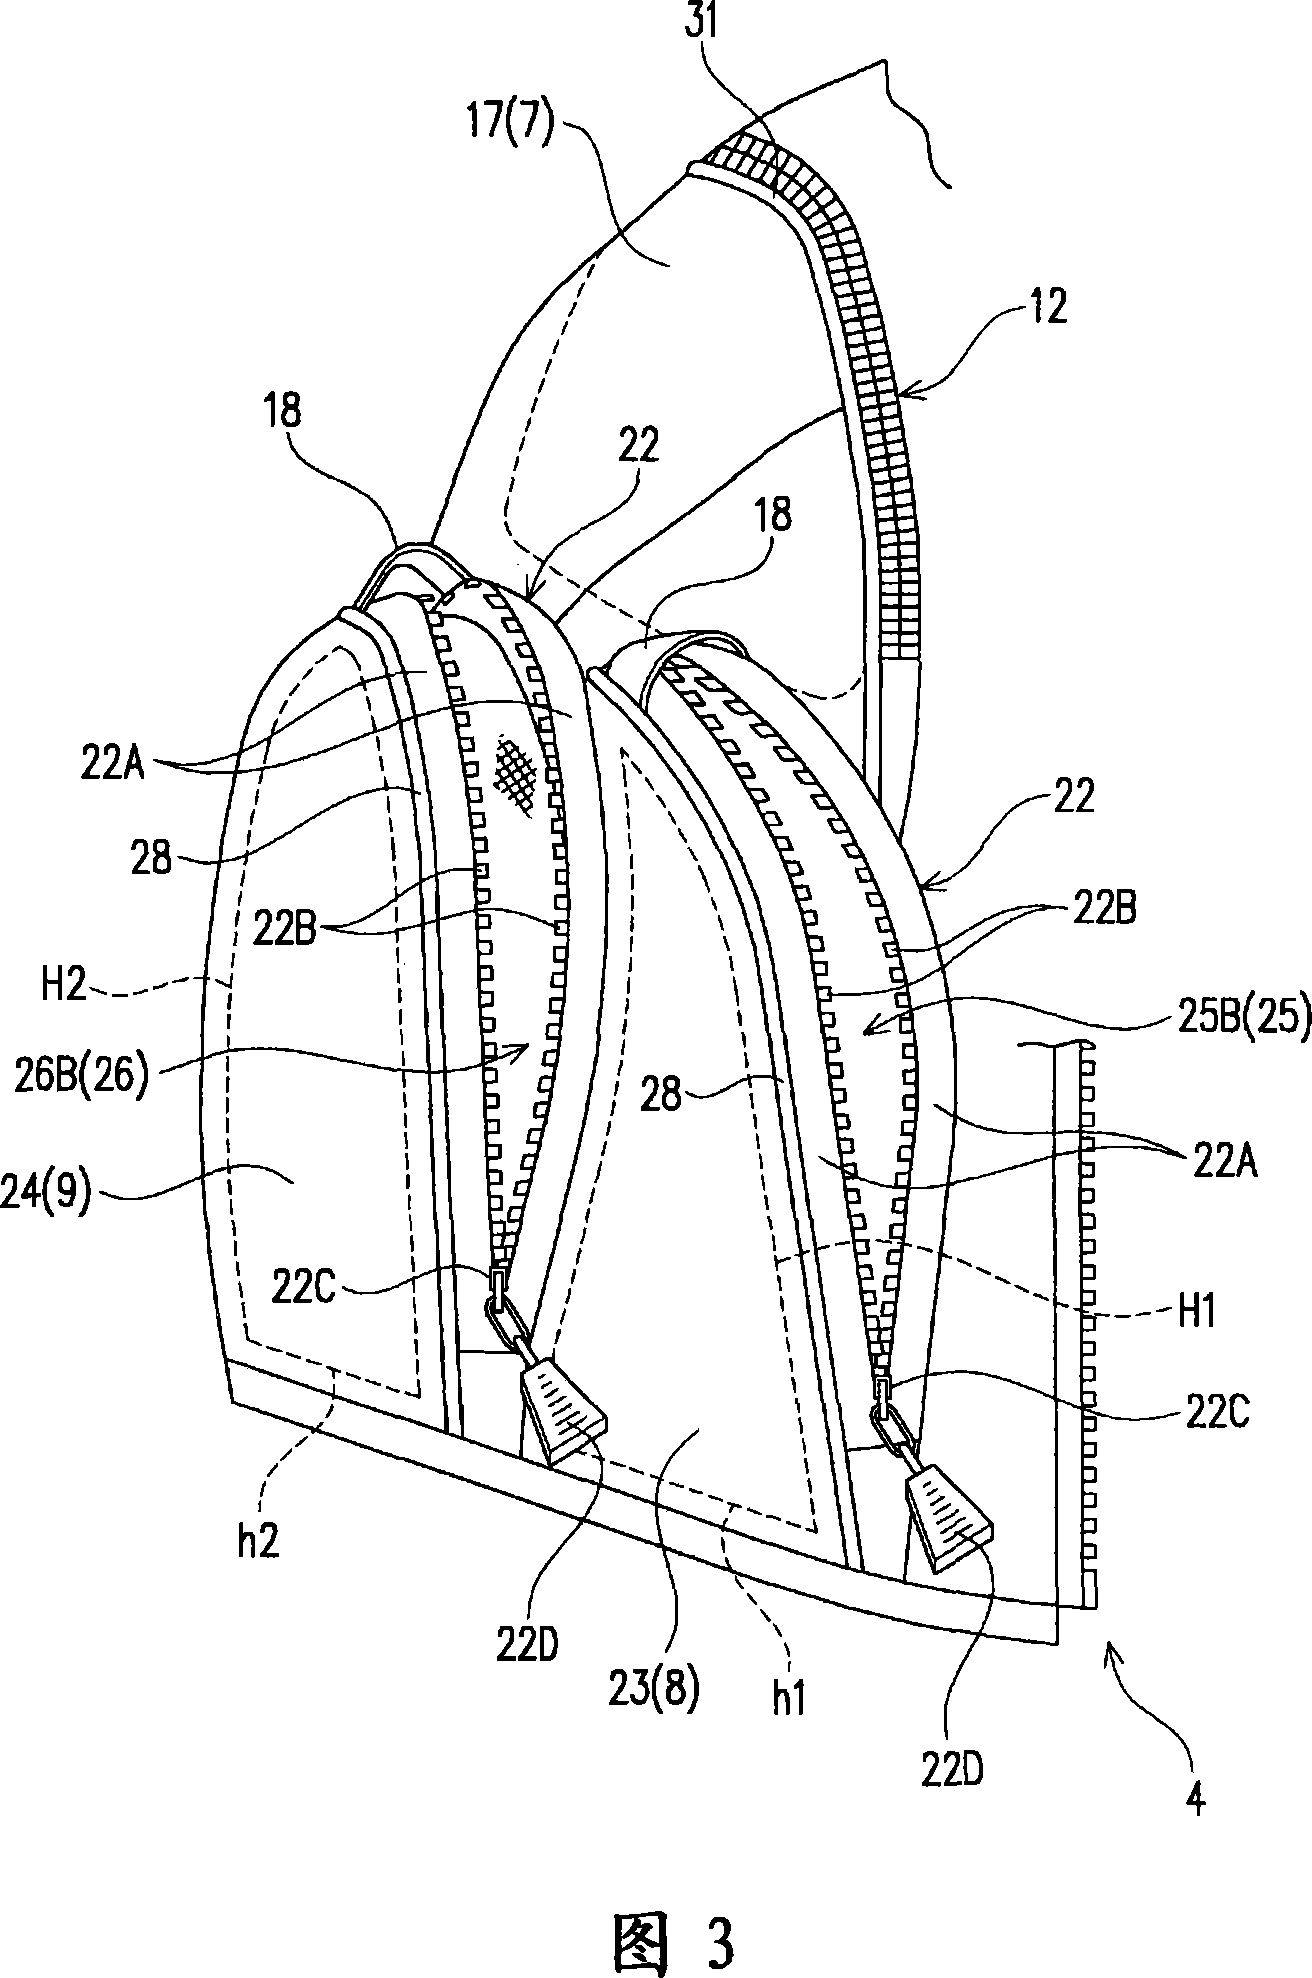 Pocket structure for fishing jacket